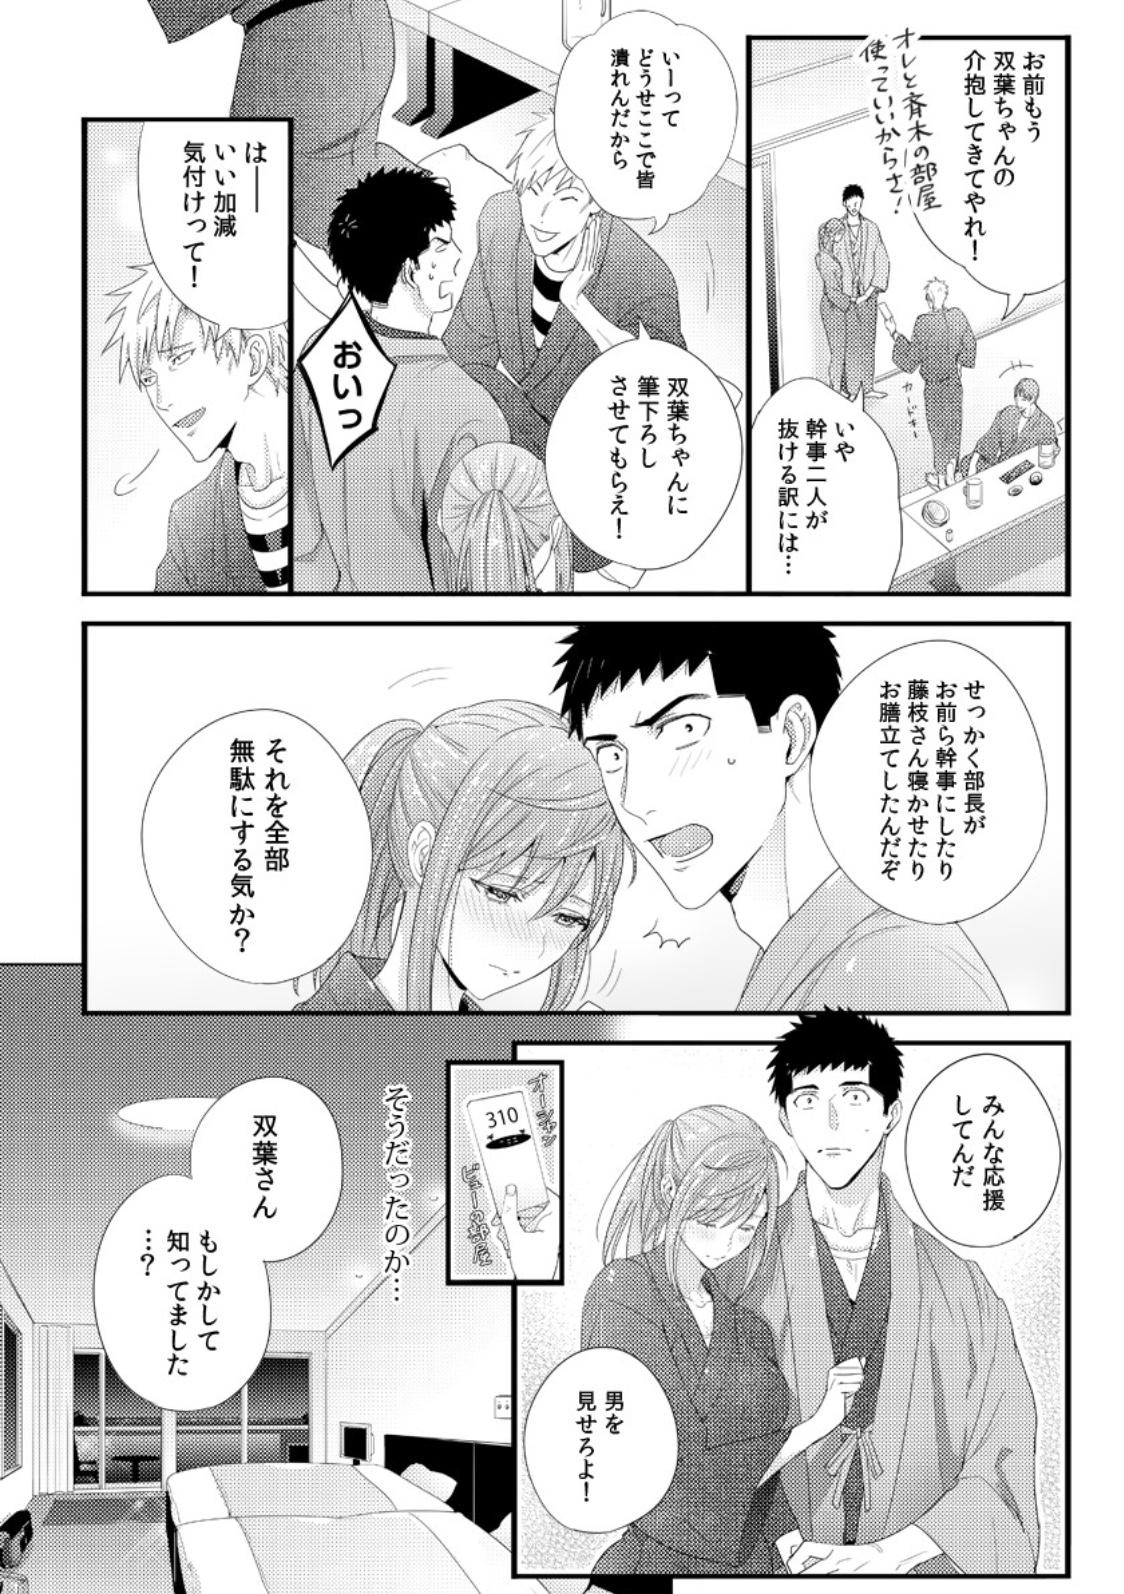 Please Let Me Hold You Futaba-San! Ch. 1-4 11